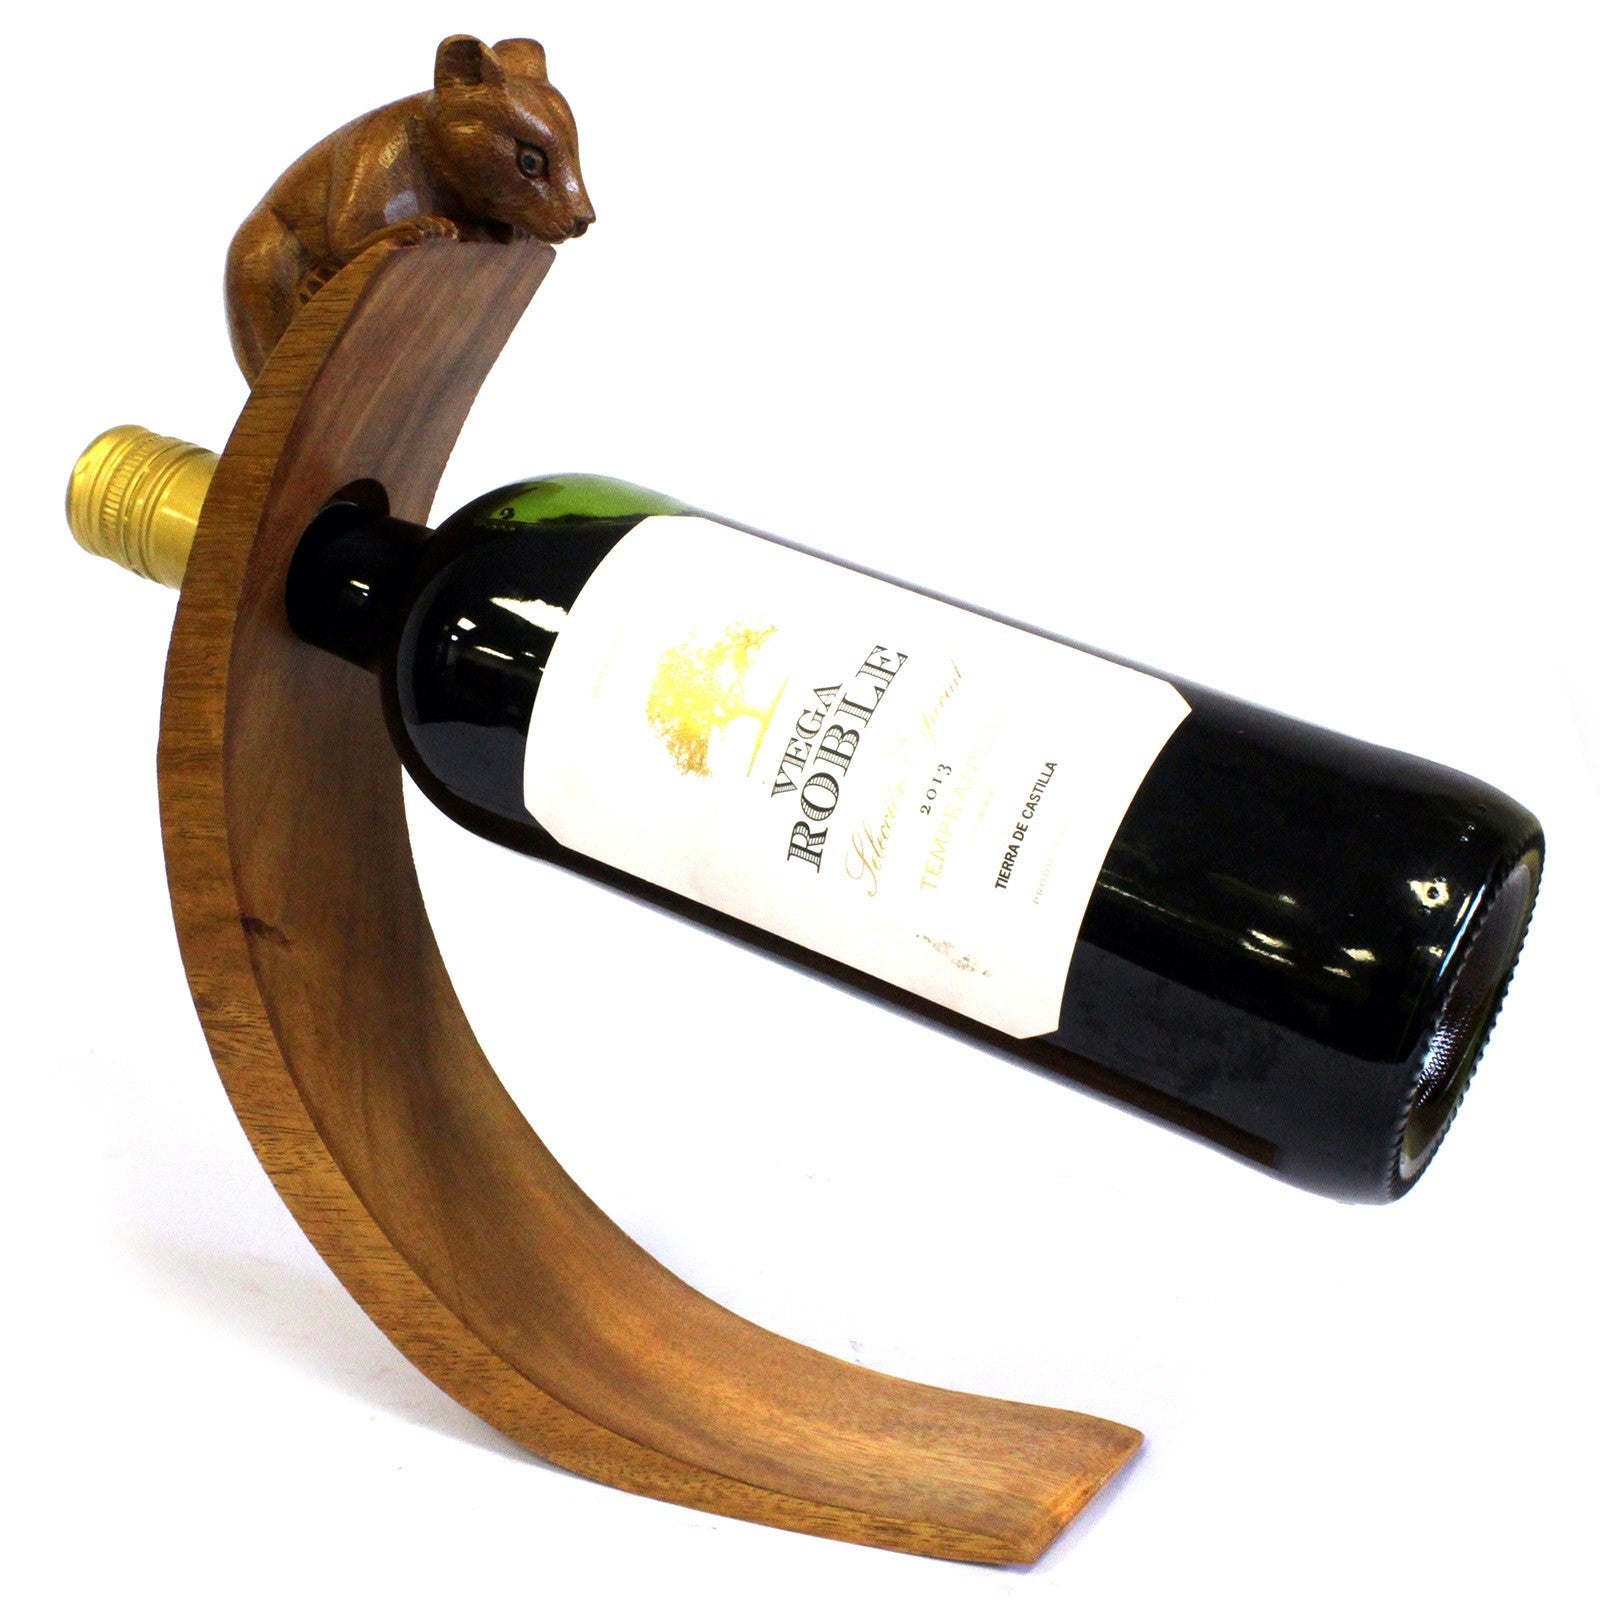 View Balance Wine Holders Mouse information